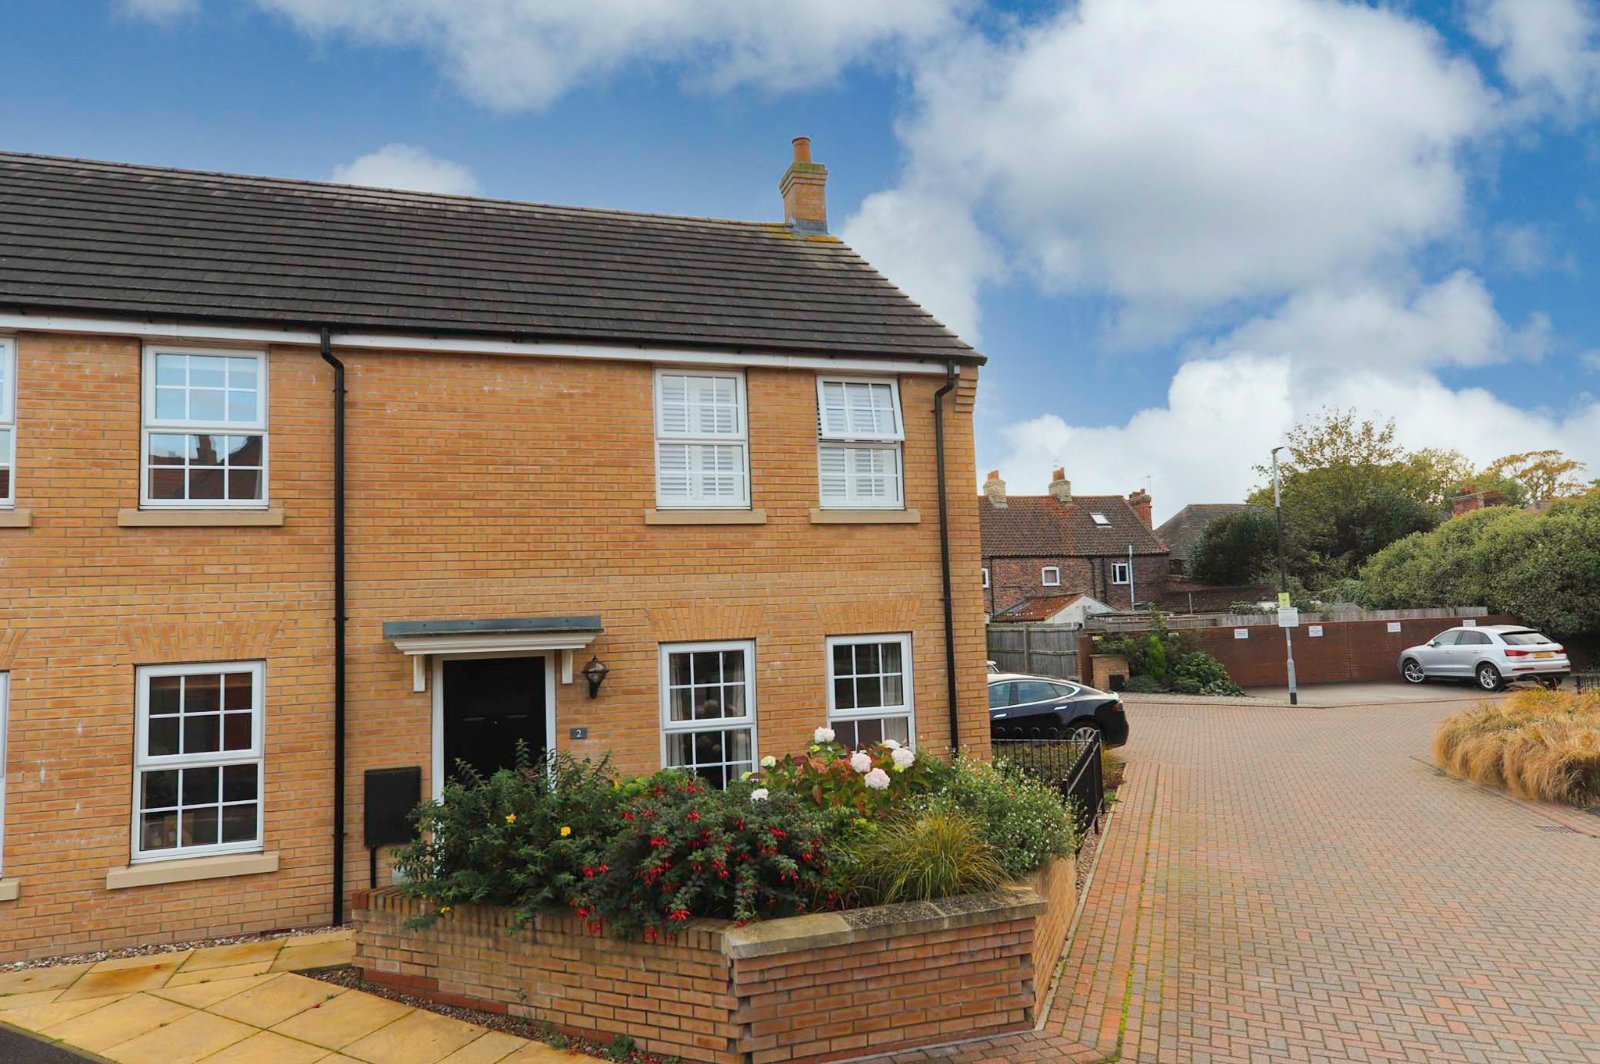 3 bed house for sale in Harrison Mews, Beverley - Property Image 1